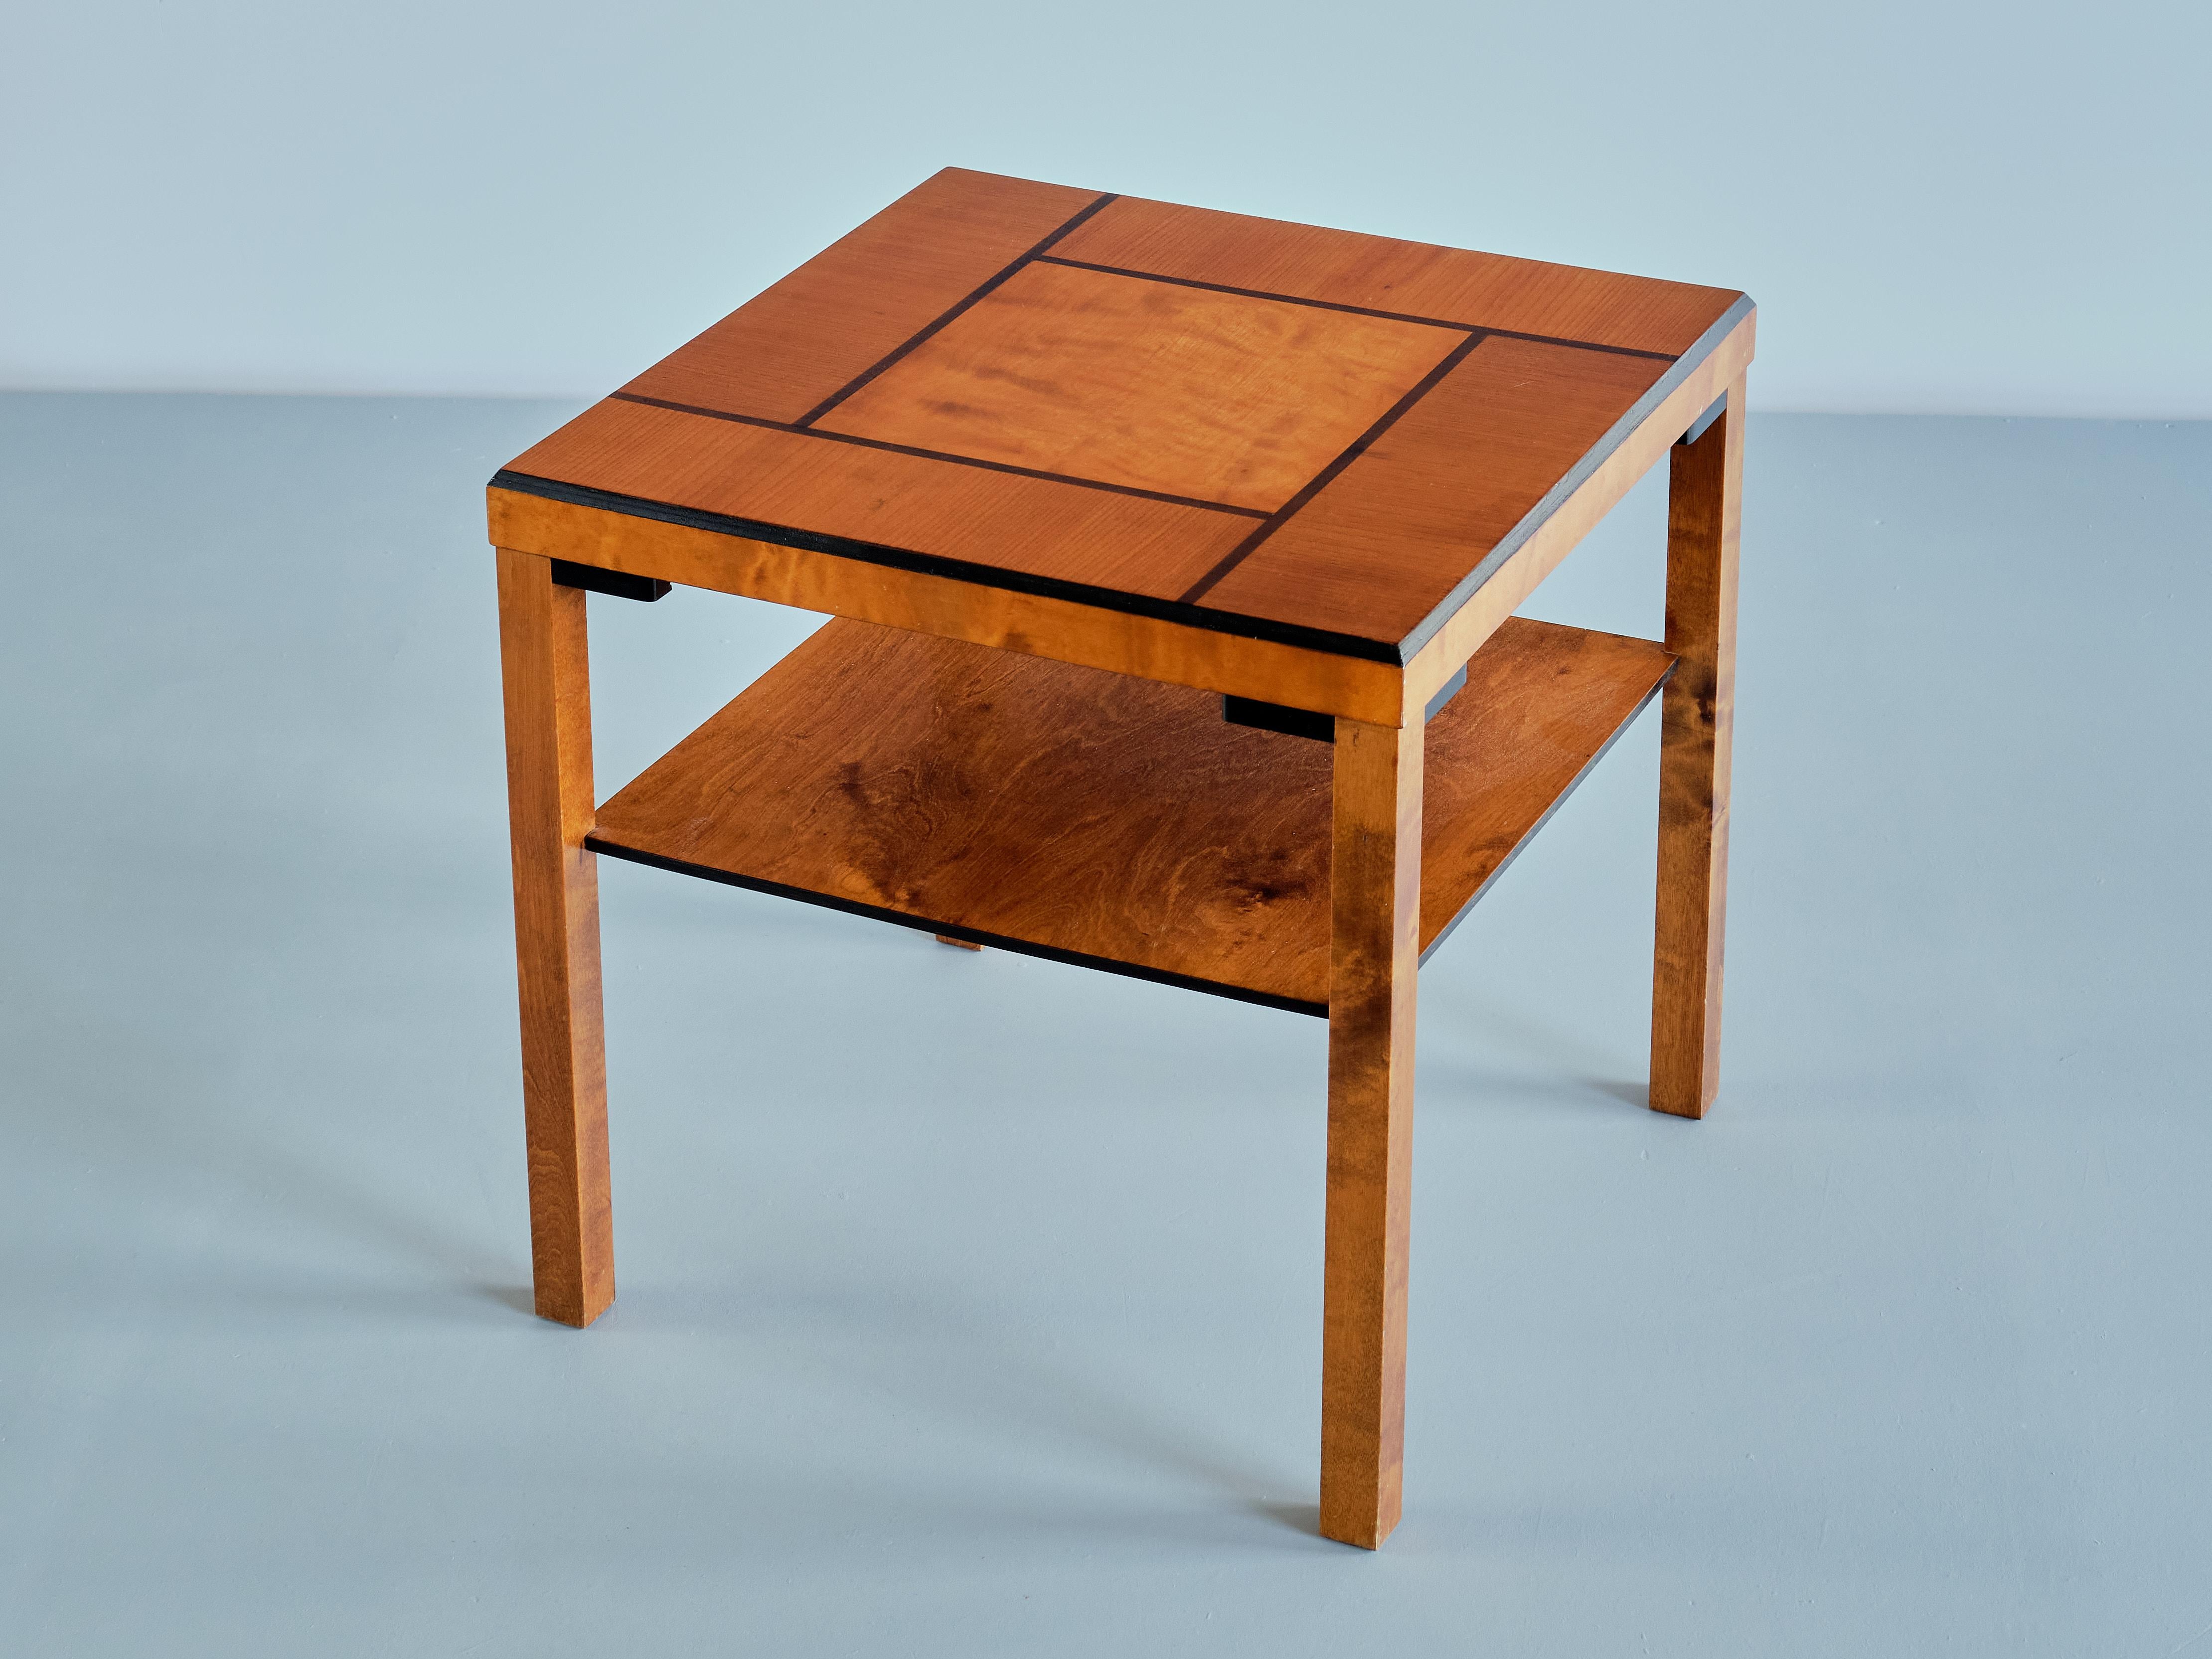 This elegant side/coffee table was produced in Sweden in the 1930s. The design is marked by the square shape of the top and legs. The top is veneered in elm and birch wood, with a central square flanked by rectangular bars. The black stained lines